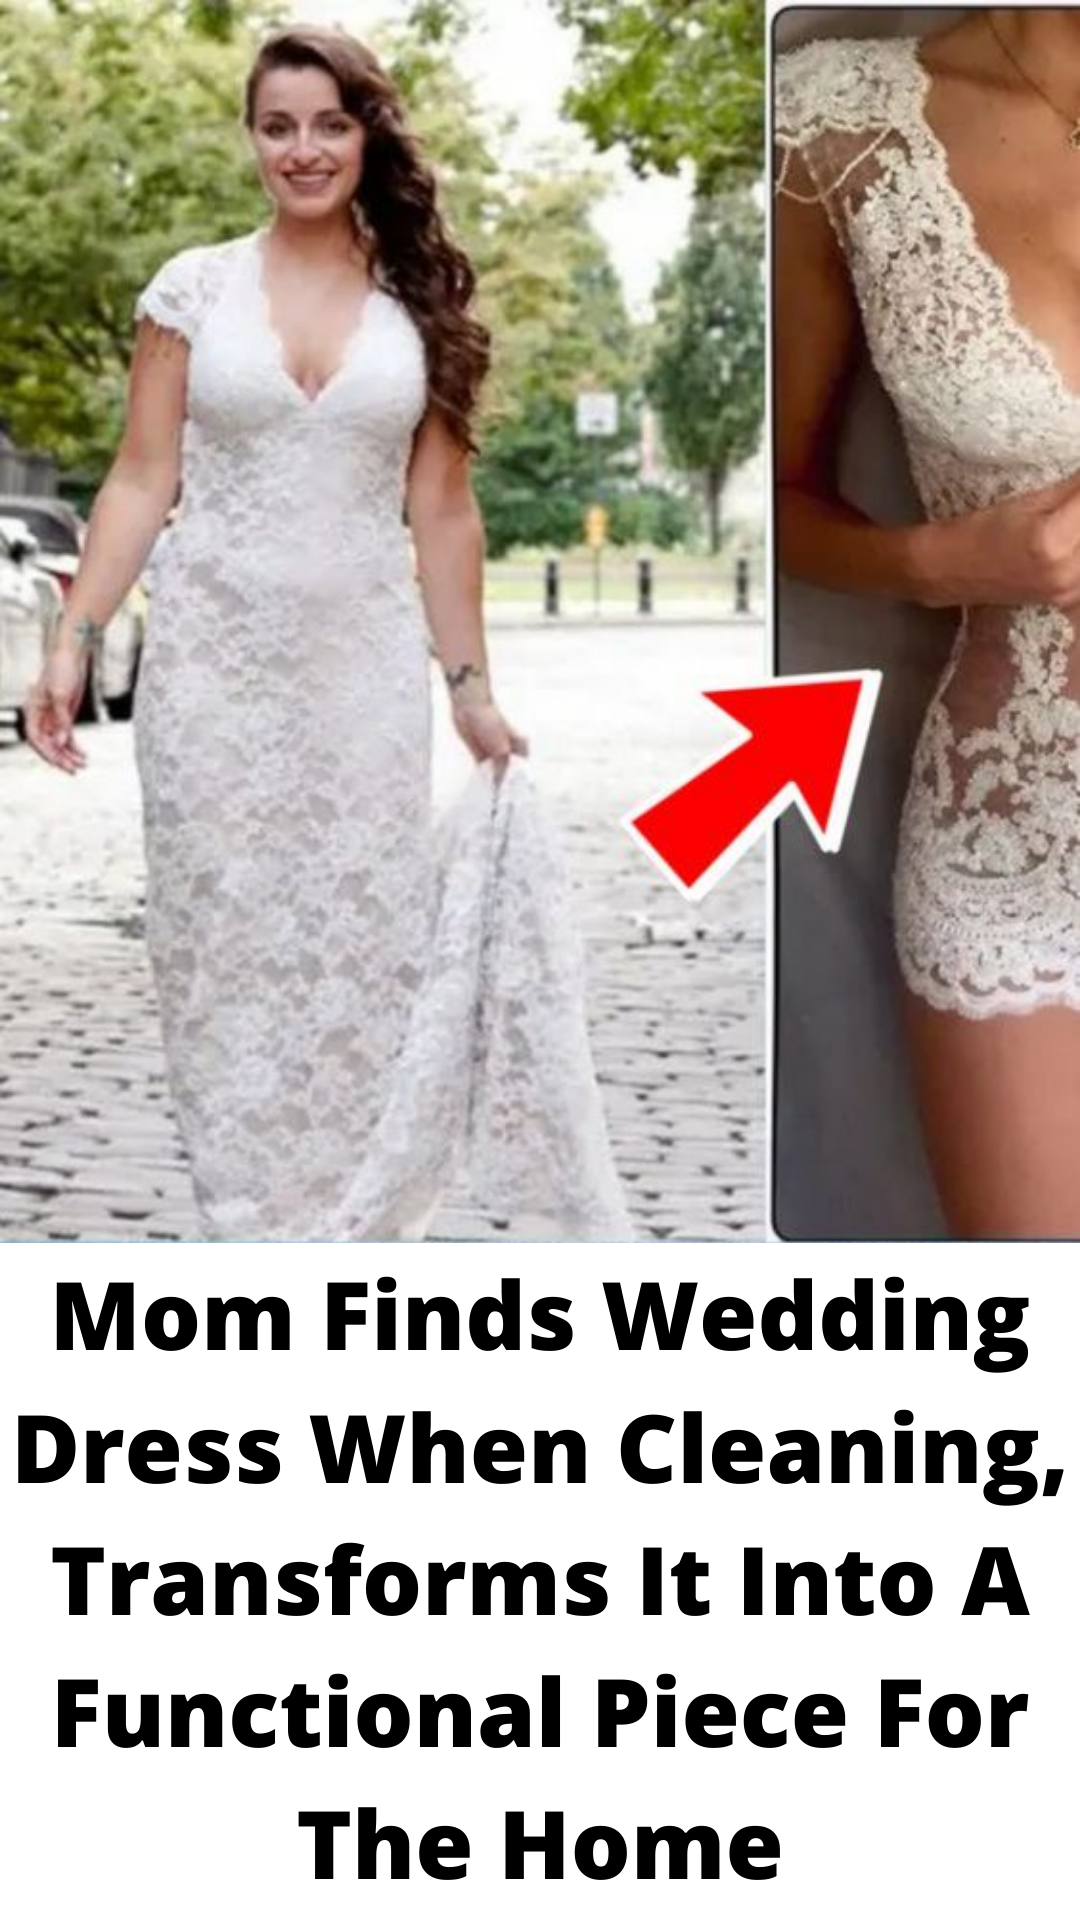 Mom Finds Wedding Dress When Cleaning, Transforms It Into A Functional Piece For The Home - Mom Finds Wedding Dress When Cleaning, Transforms It Into A Functional Piece For The Home -   14 style Girl funny ideas